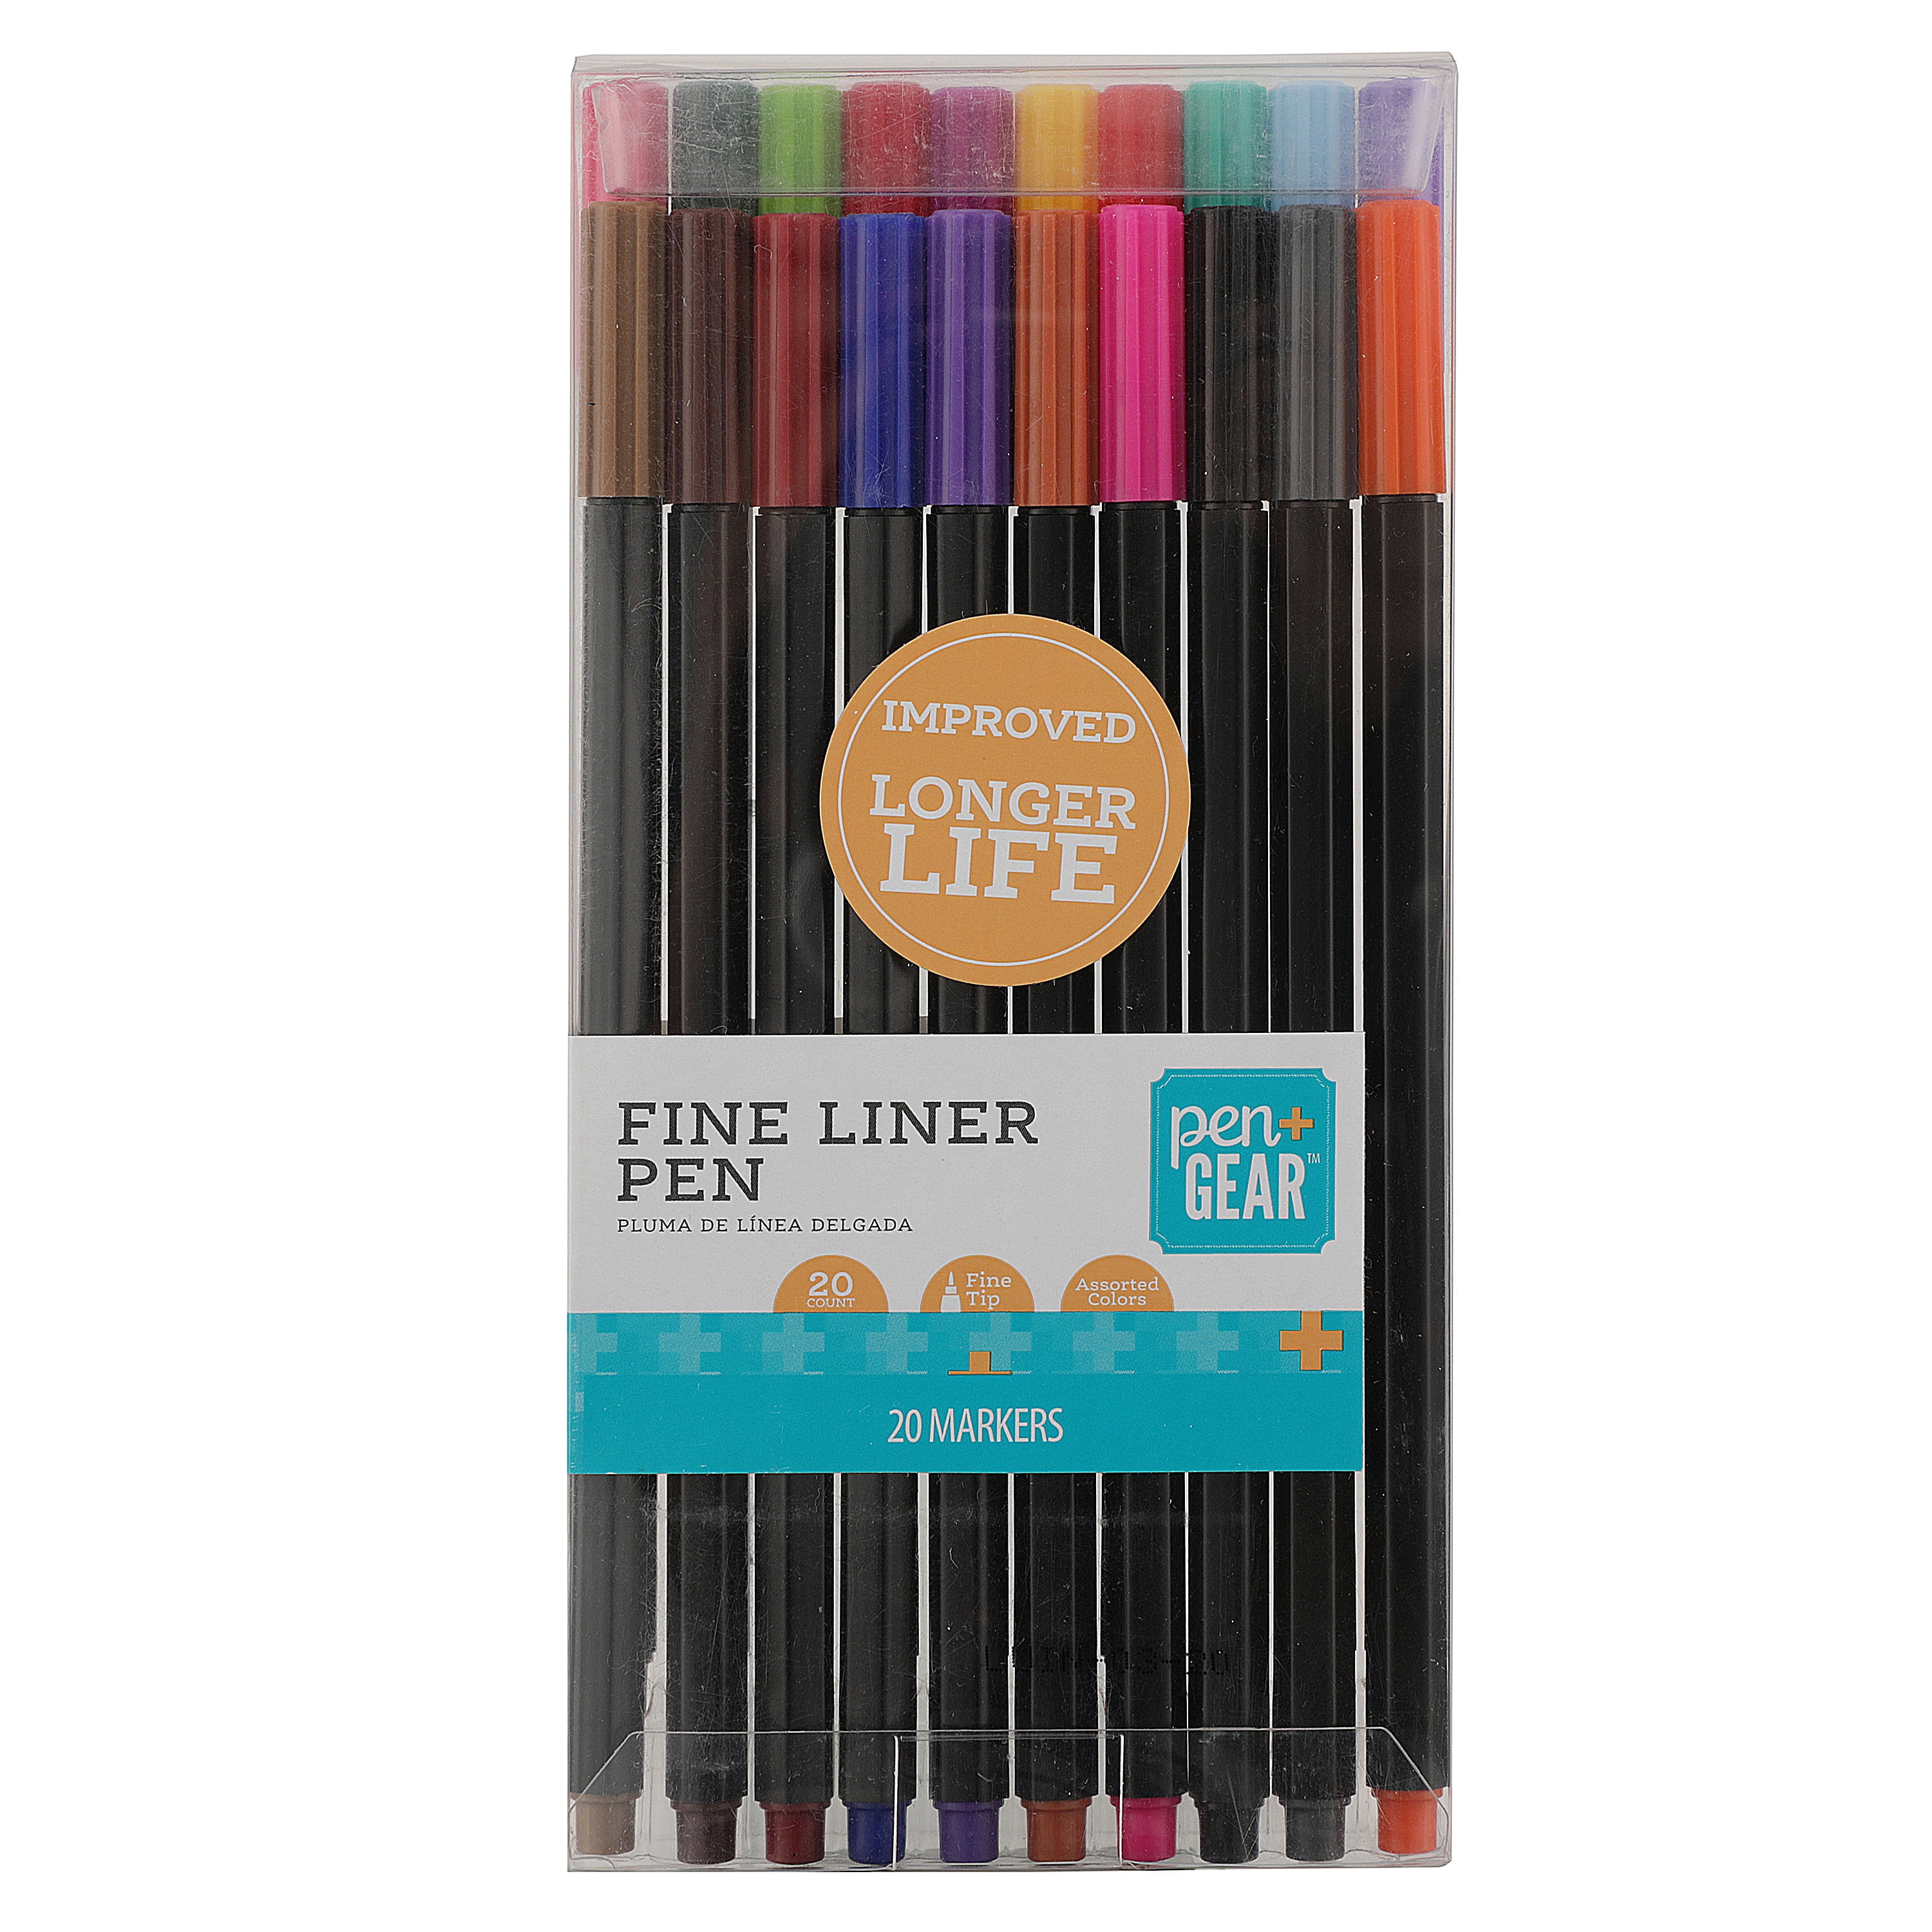 Pen+gear Fine Writer, 20 Count, Assorted Colors